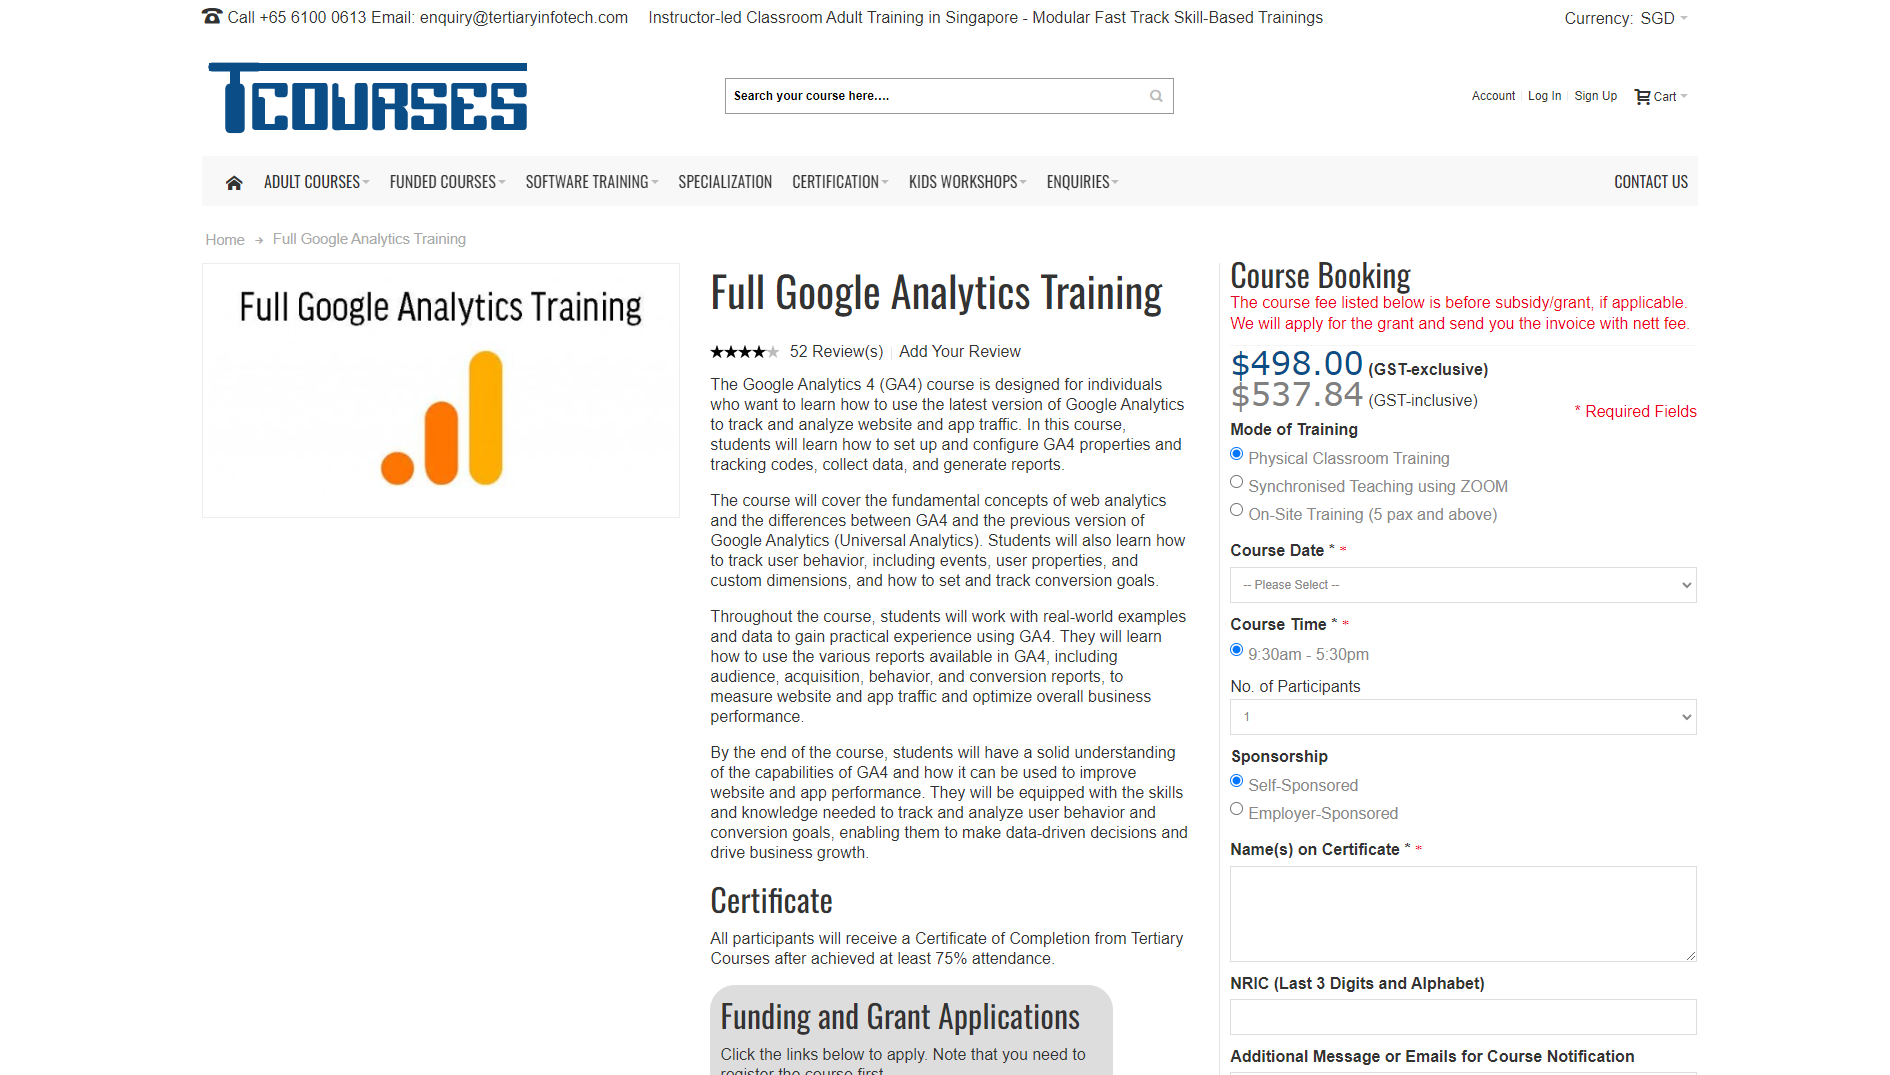 google analytics certification from tertiary courses in singapore